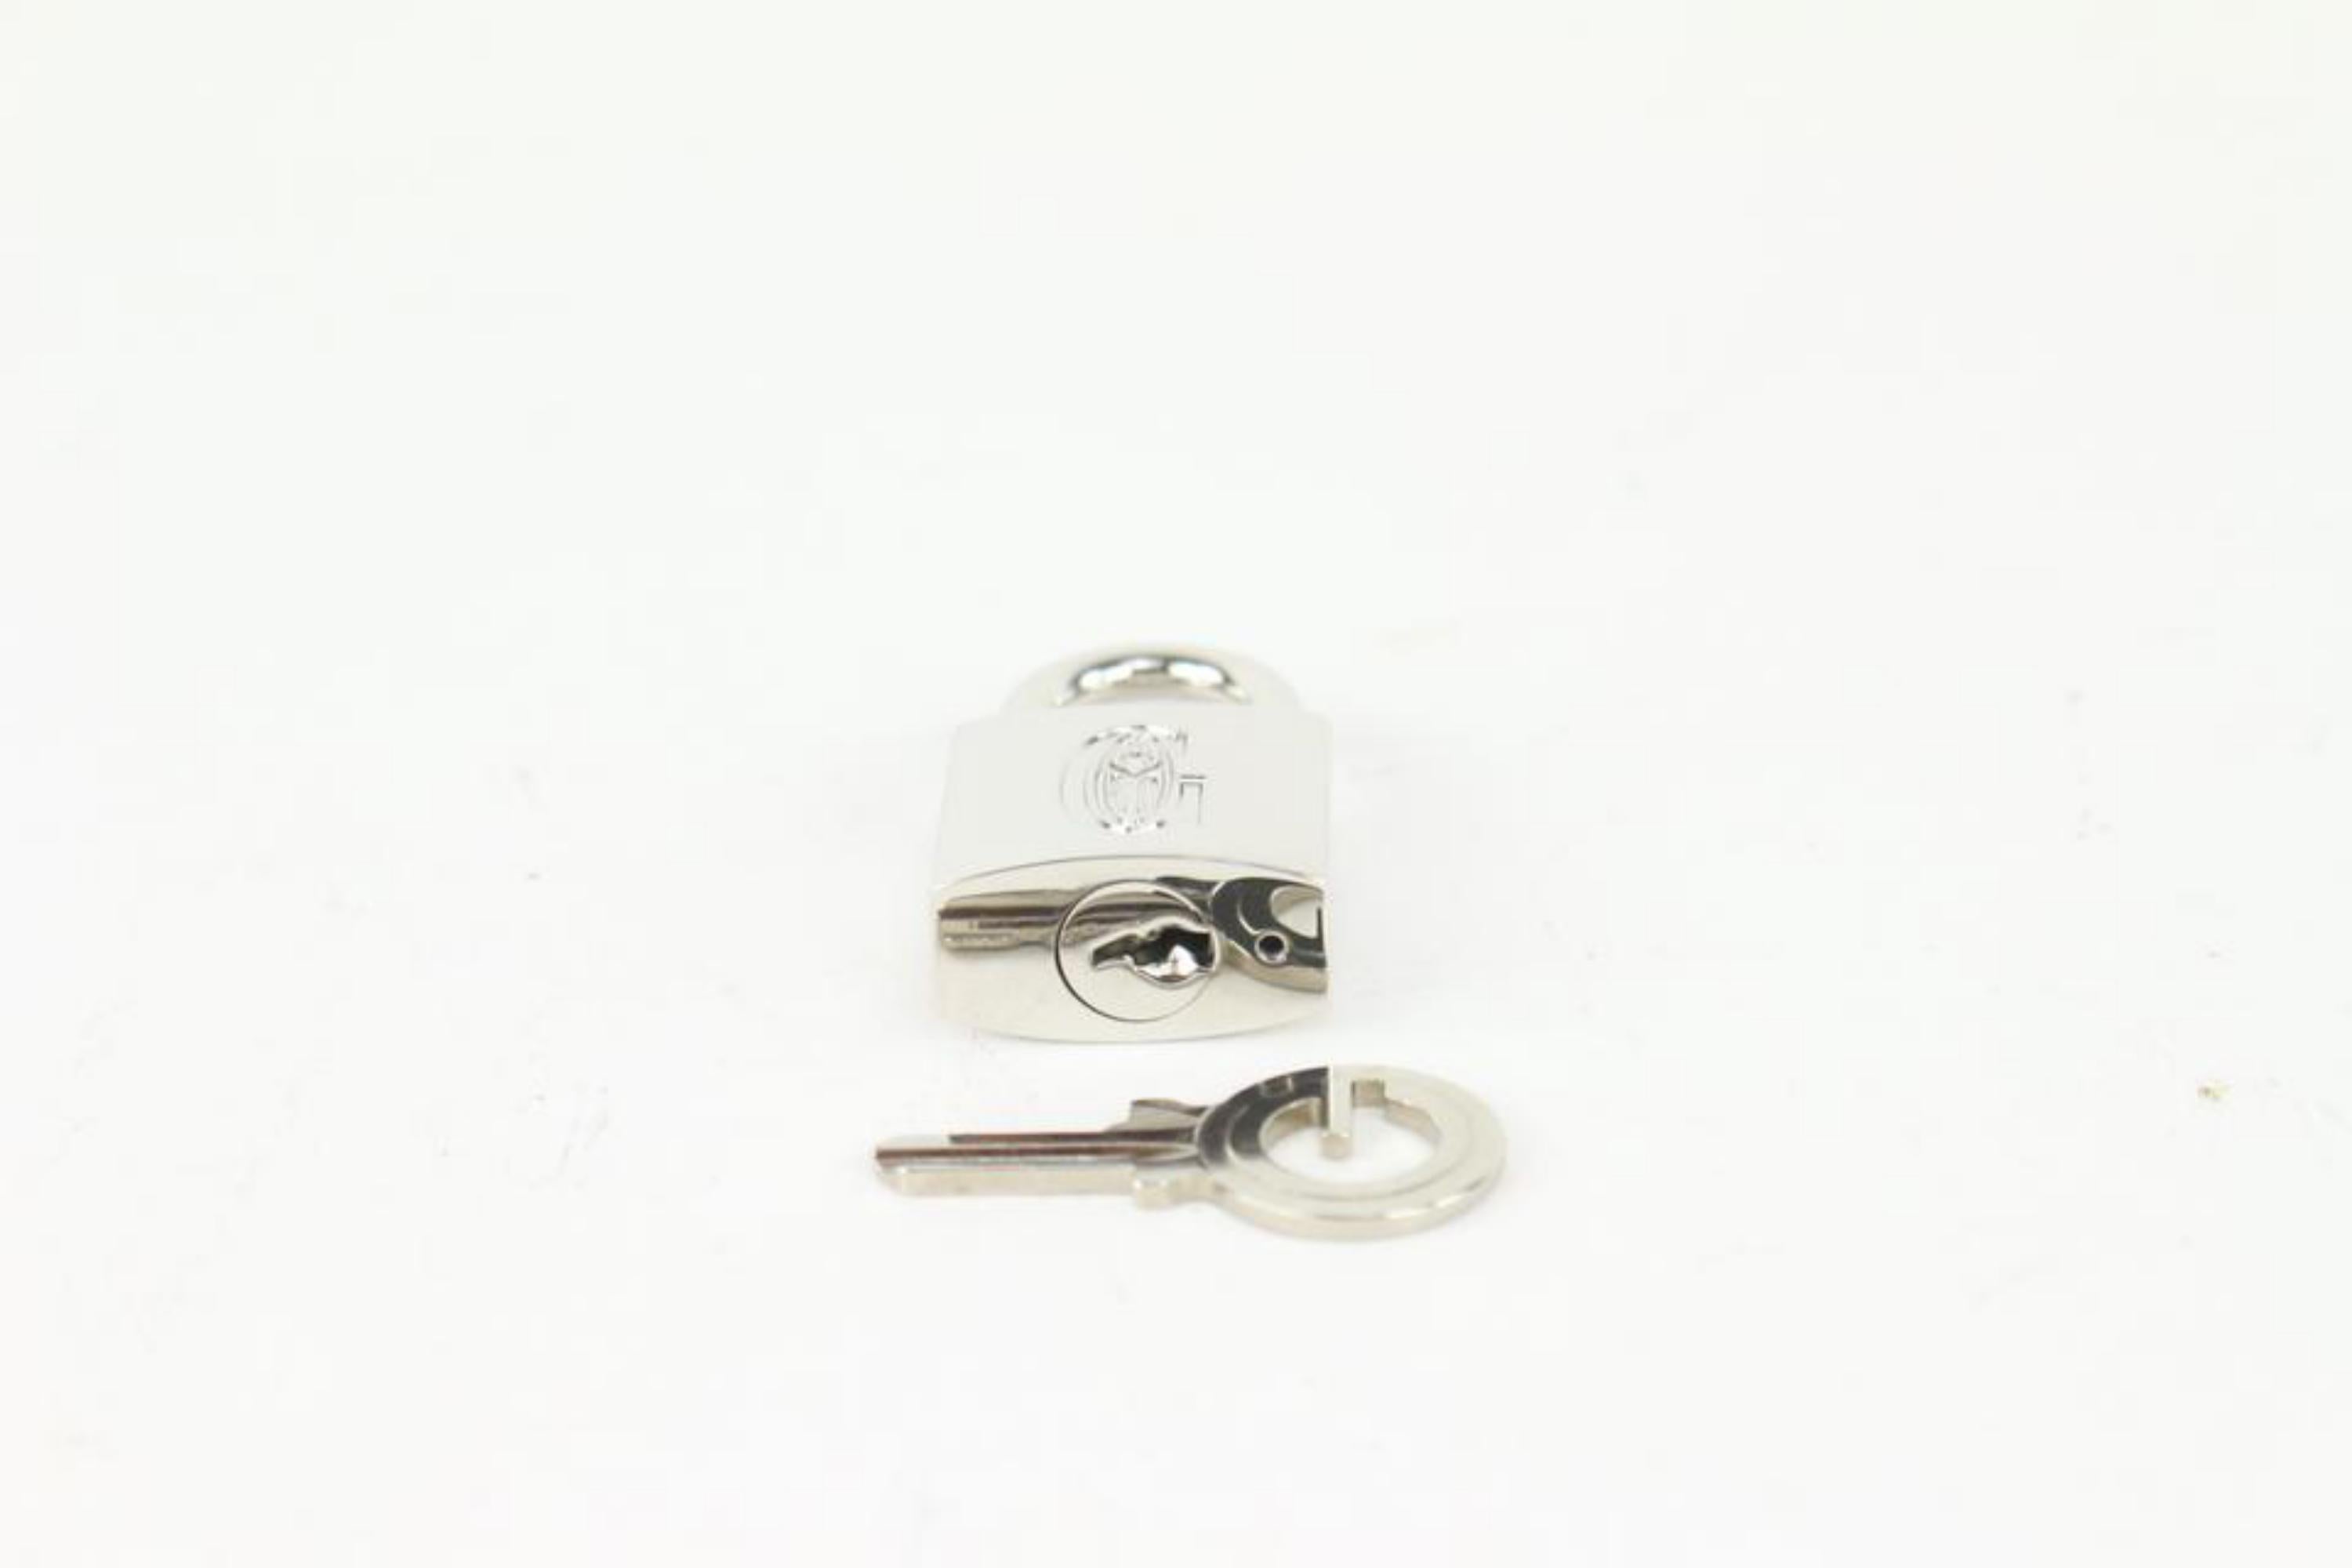 Goyard Silver Lock and Key Set Cadena Bag Charm 1012gy30 In Excellent Condition In Dix hills, NY